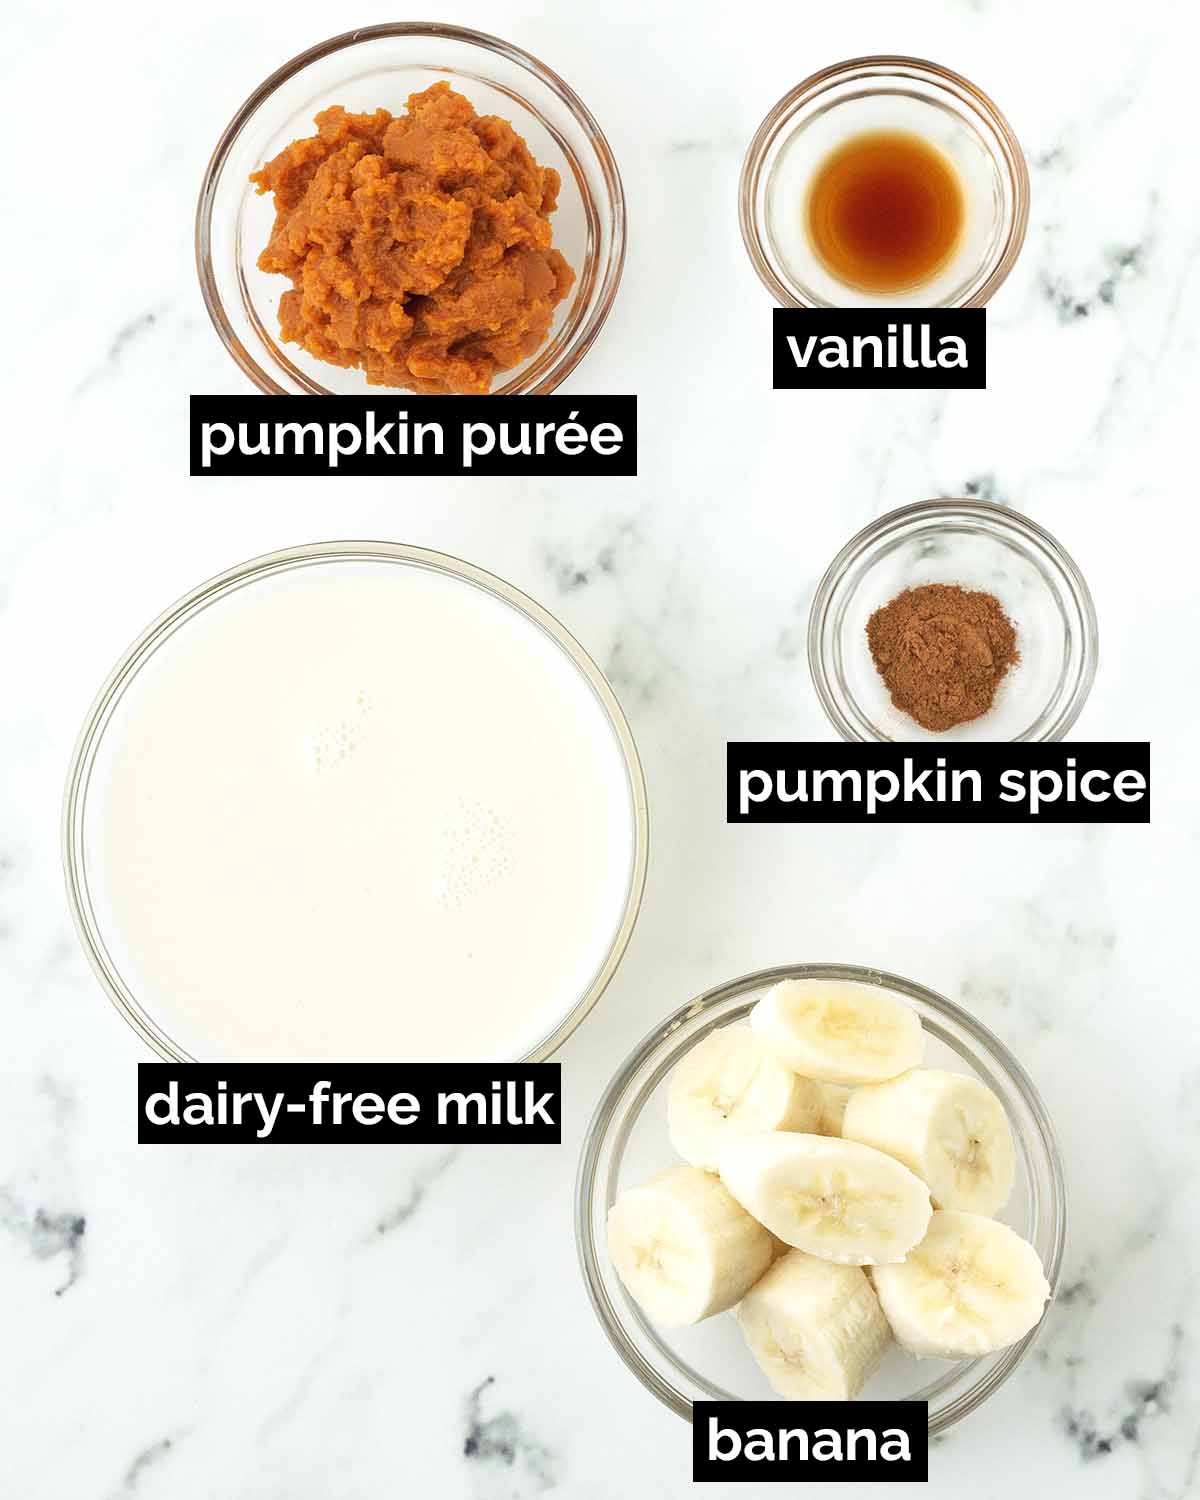 An overhead shot showing the ingredients needed to make a vegan pumpkin smoothie.